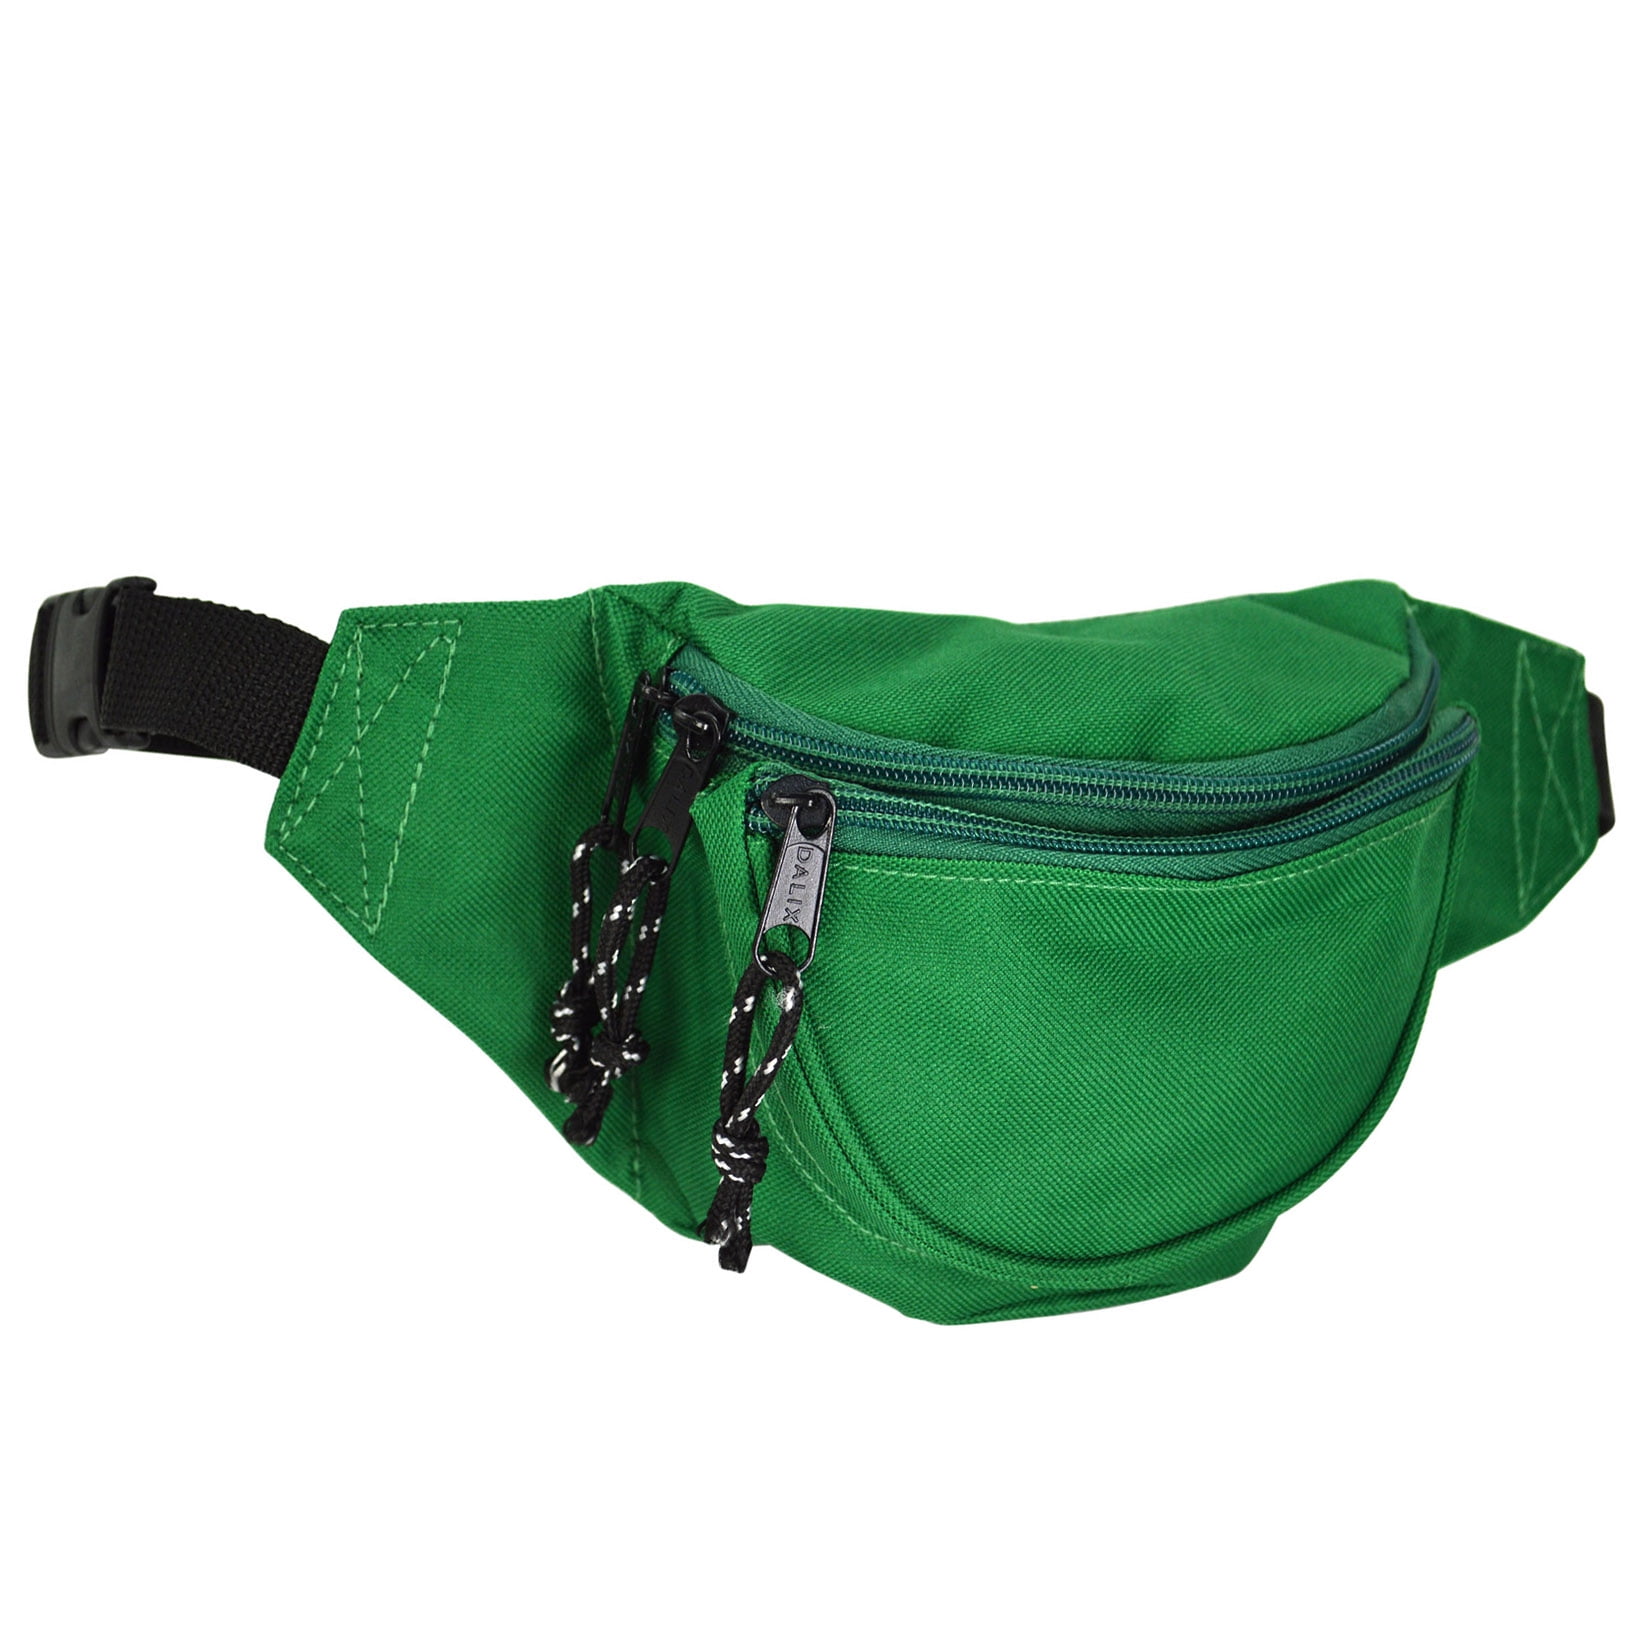 DALIX Unisex Small Fanny Pack Waist Pouch S XS Size 24 to 31 in Dark Green